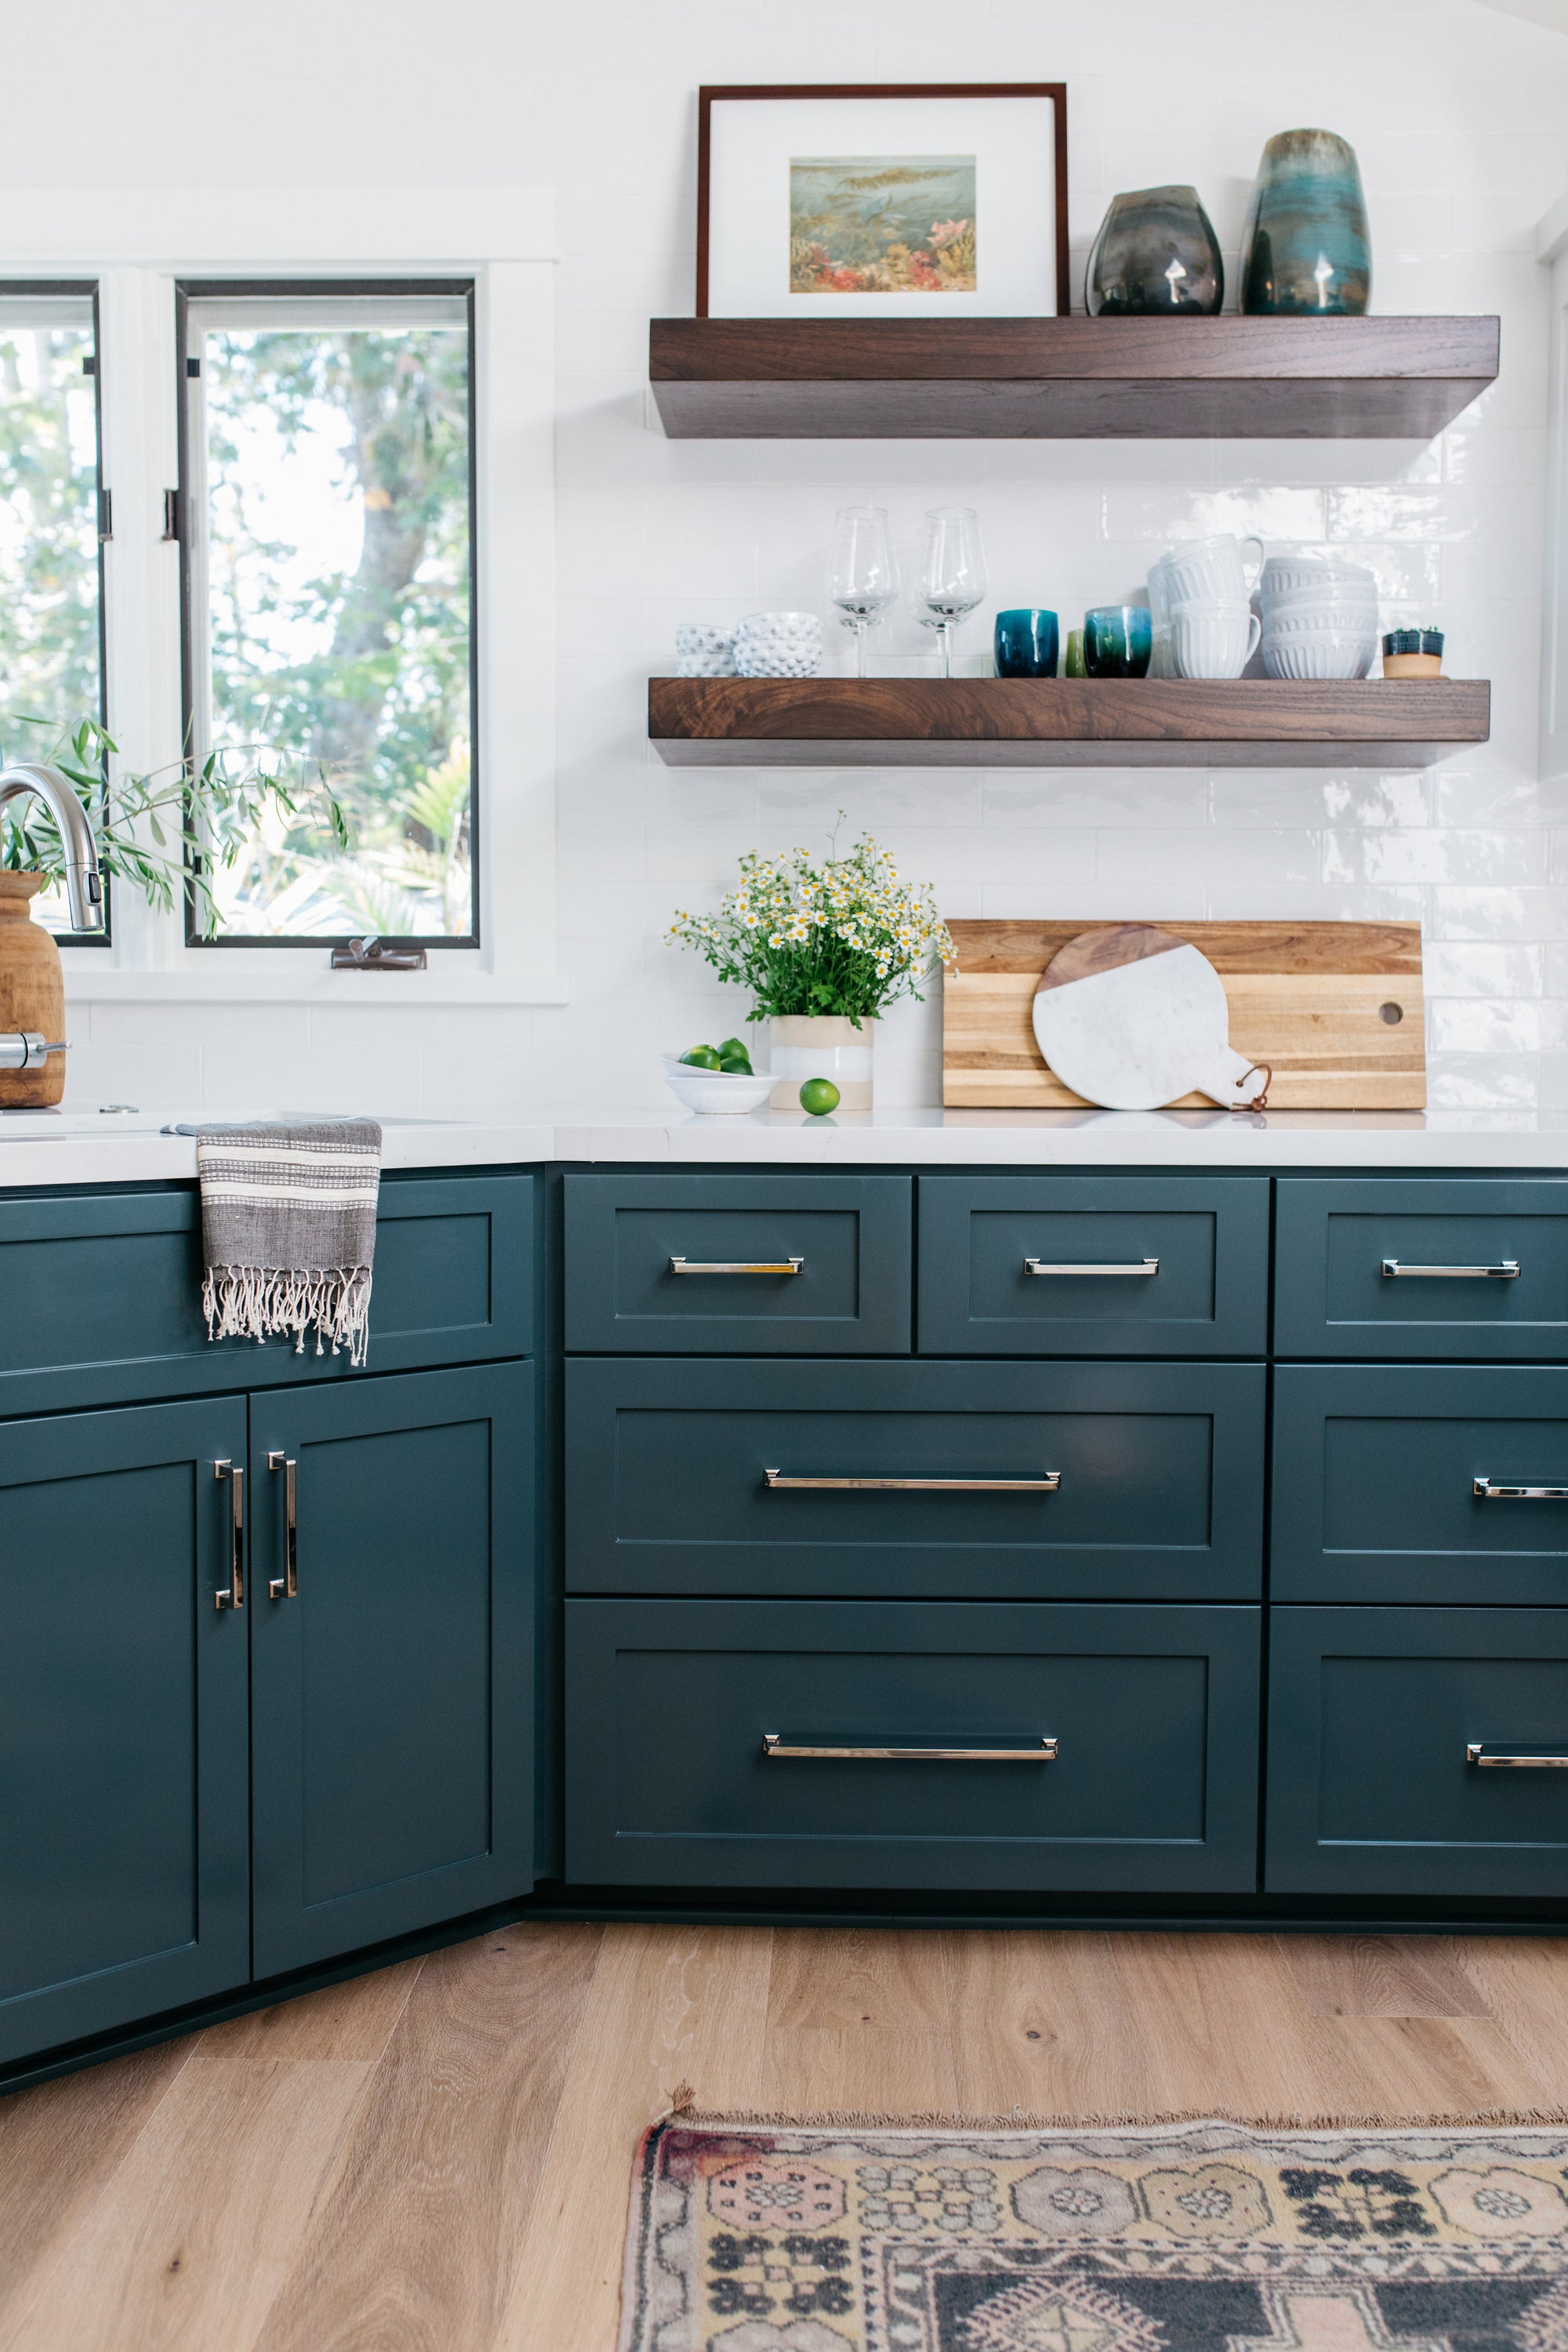 greige design shop + interiors kitchen with dark blue green cabinets and white counter tops laguan beach california design